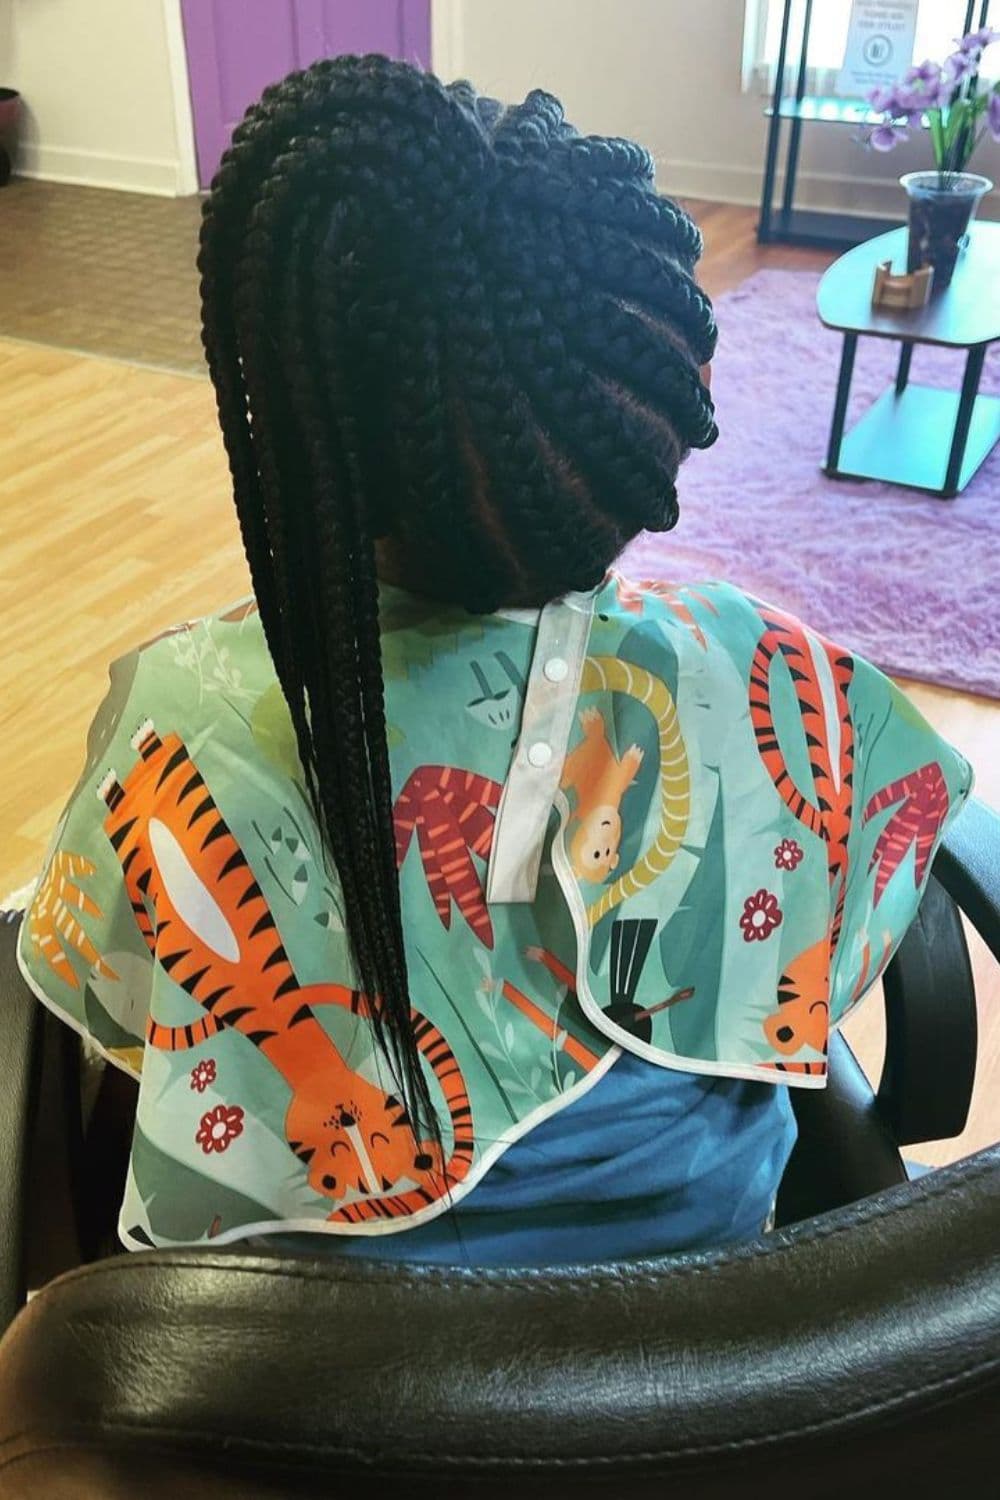 A girl sitting on a chair with a black braided side ponytail.